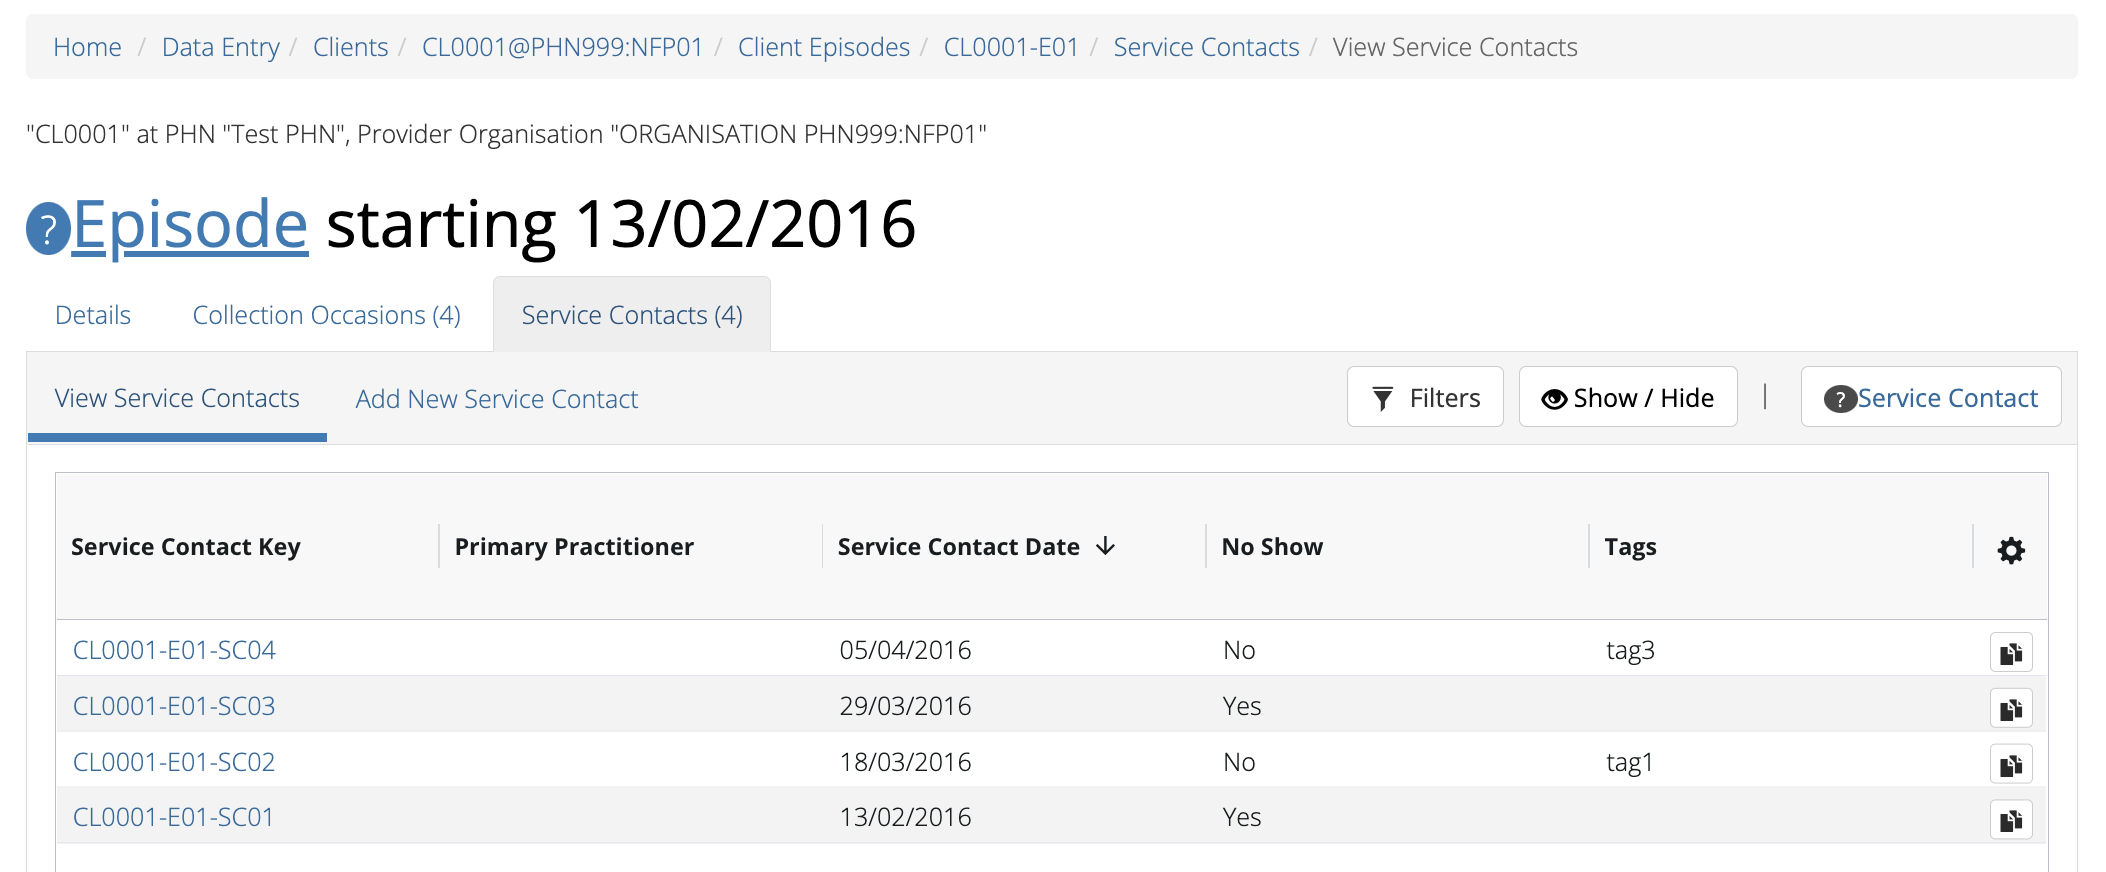 Client Episode Service Contacts Table View